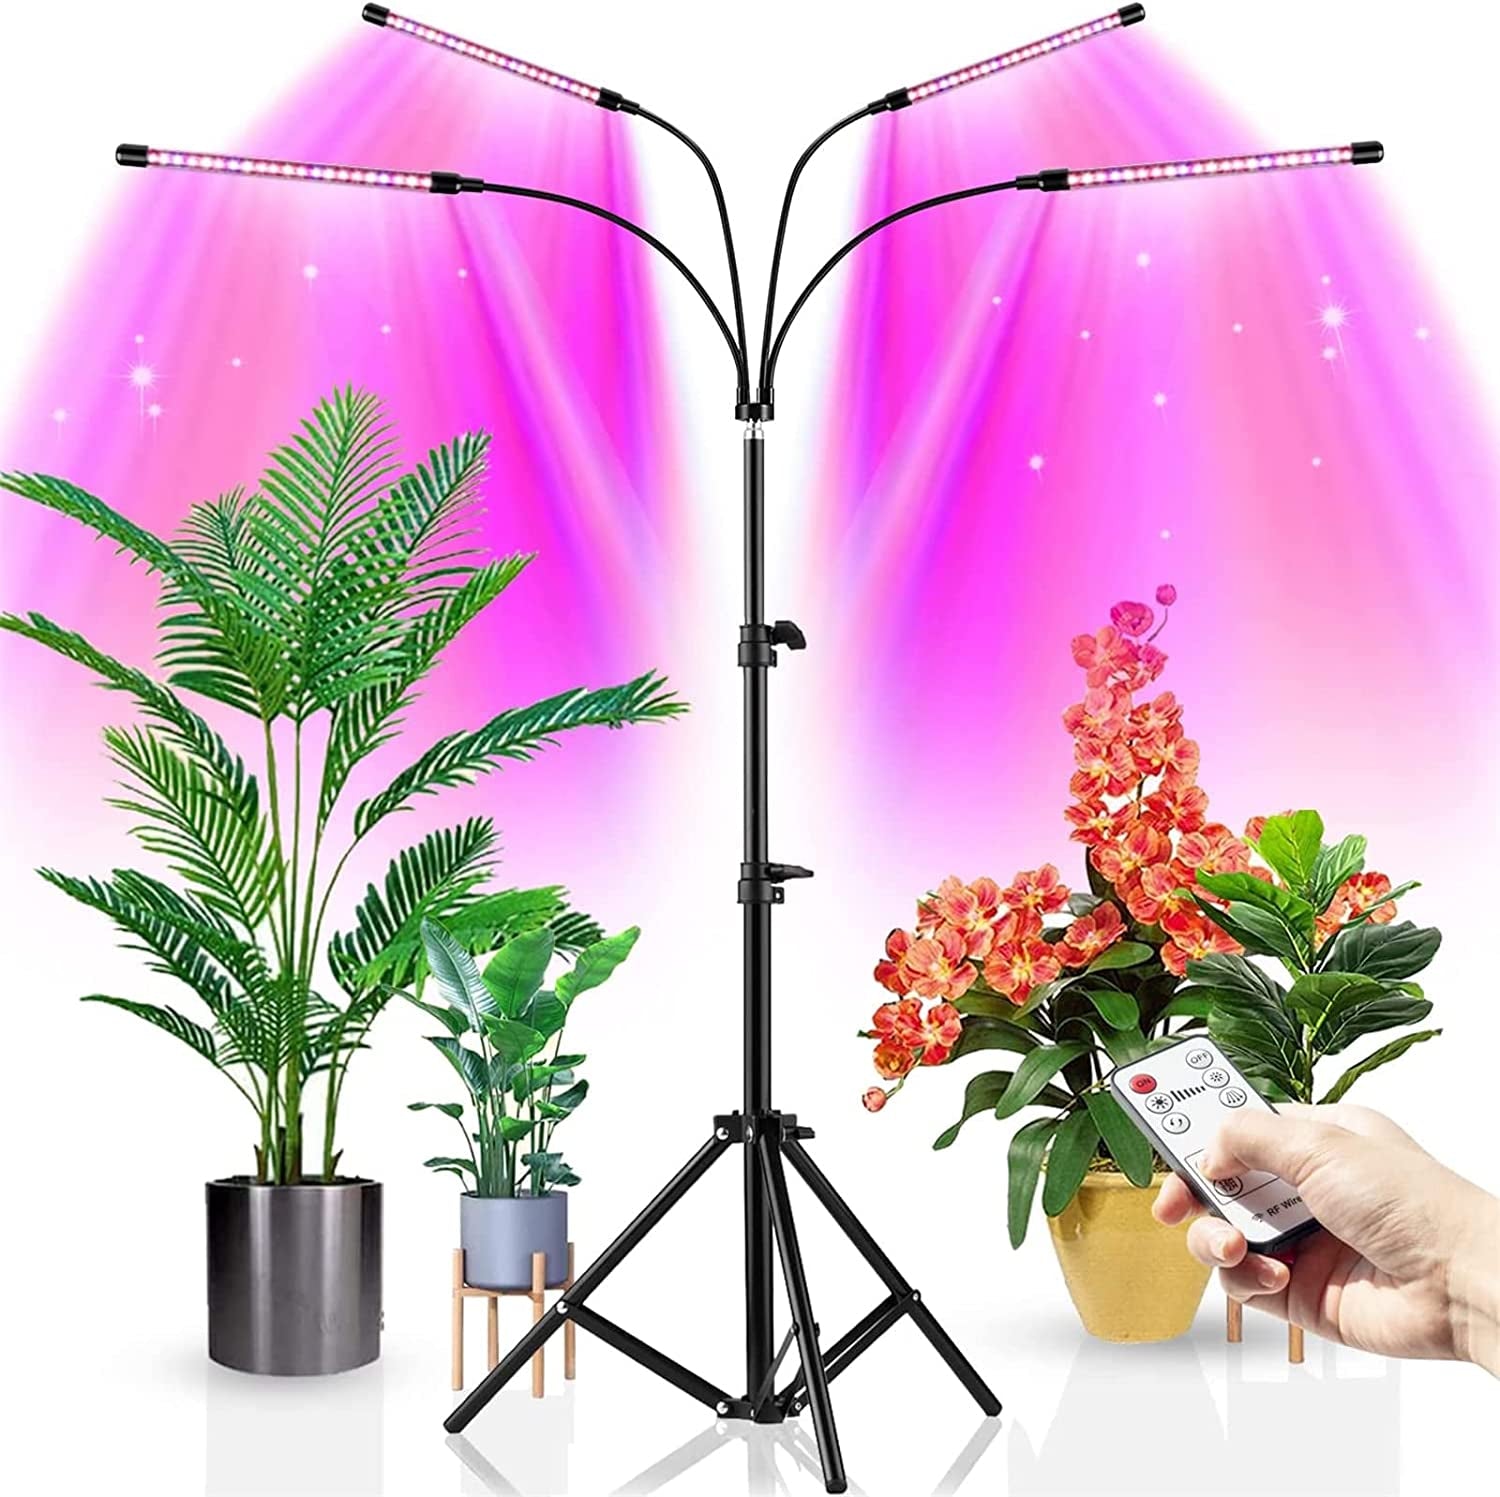 Nikuwaxi, Grow Lights for Indoor Plants, LED Full Spectrum Led Plant Growing Light for Indoor Plants, 3 Light Modes & 4 Heads Grow Lamp with 4/8/12H Timer, Suitable for All Indoor Plants (Tripod Adjustable 15-48 Inch)